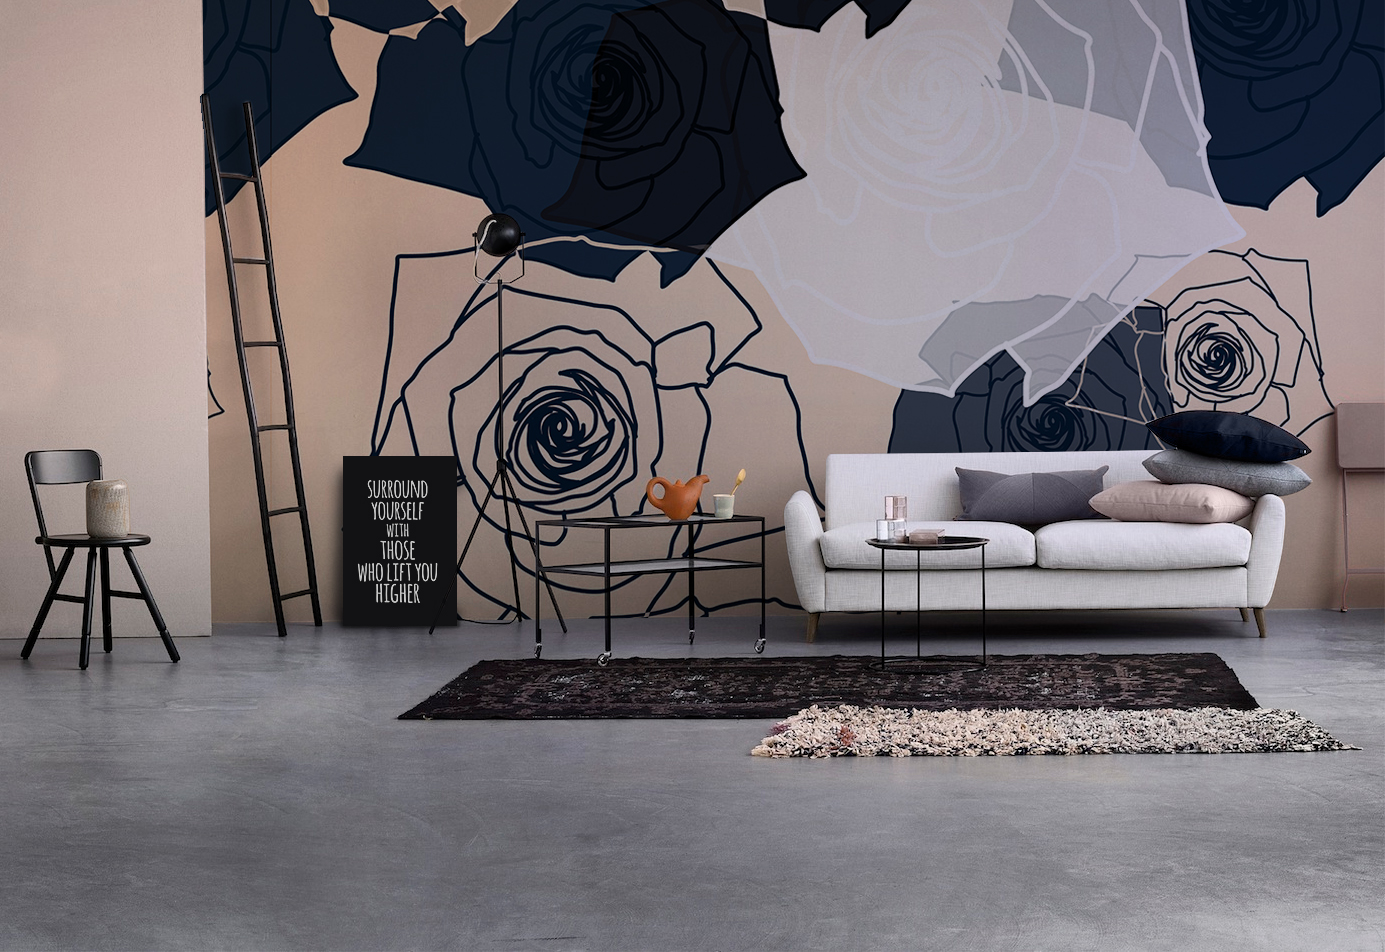 More Nature • Living room - Contemporary - Art & lifestyle - Flowers and plants - Wall Murals - Prints